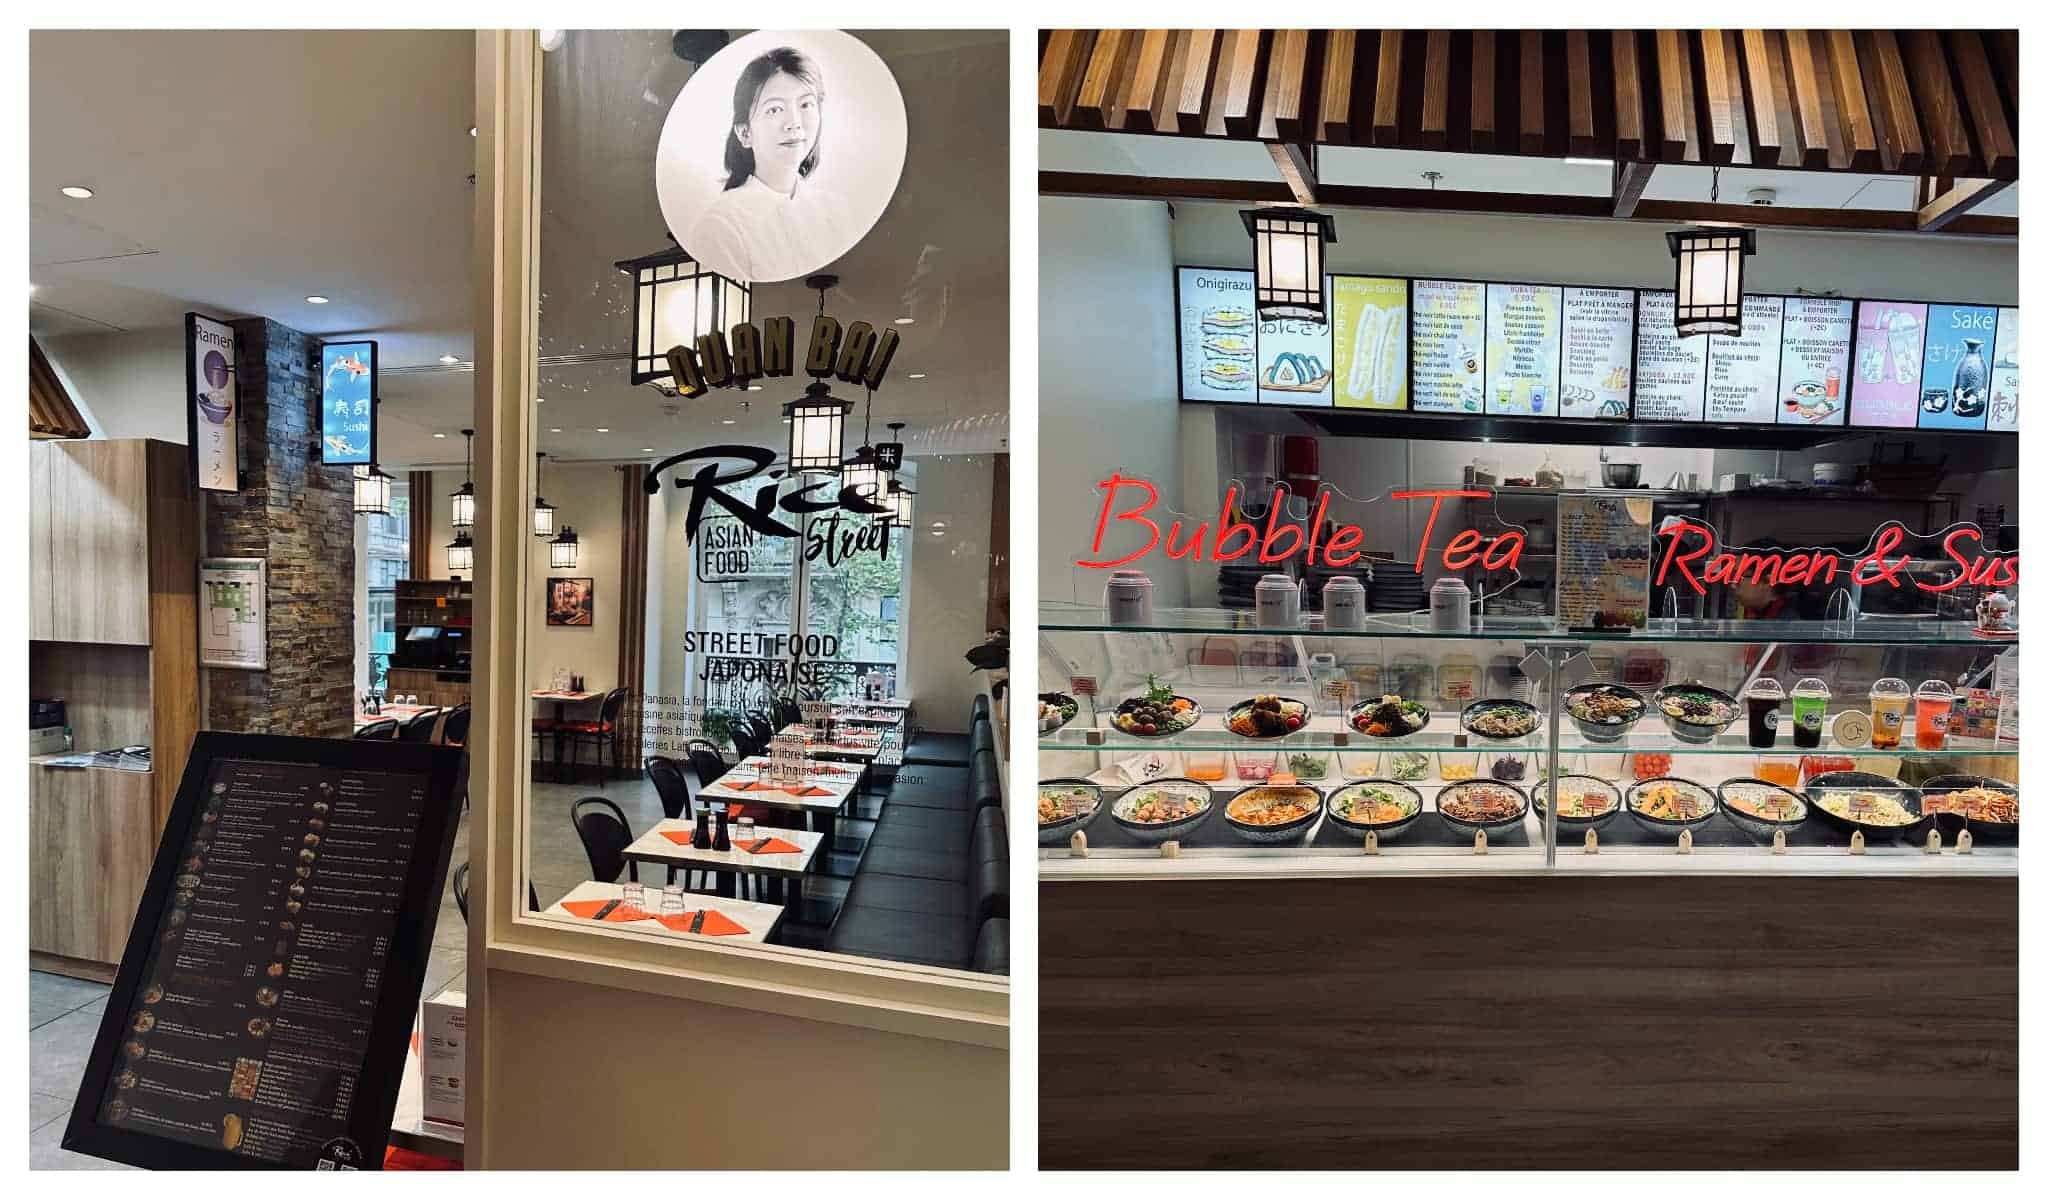 left: the exteriors of Rice Street by Quan Bai at Les Nouvelles Tables du Gourmet by Galeries Lafayette, Right: bubble tea stand at Rice Street by Quan Bai